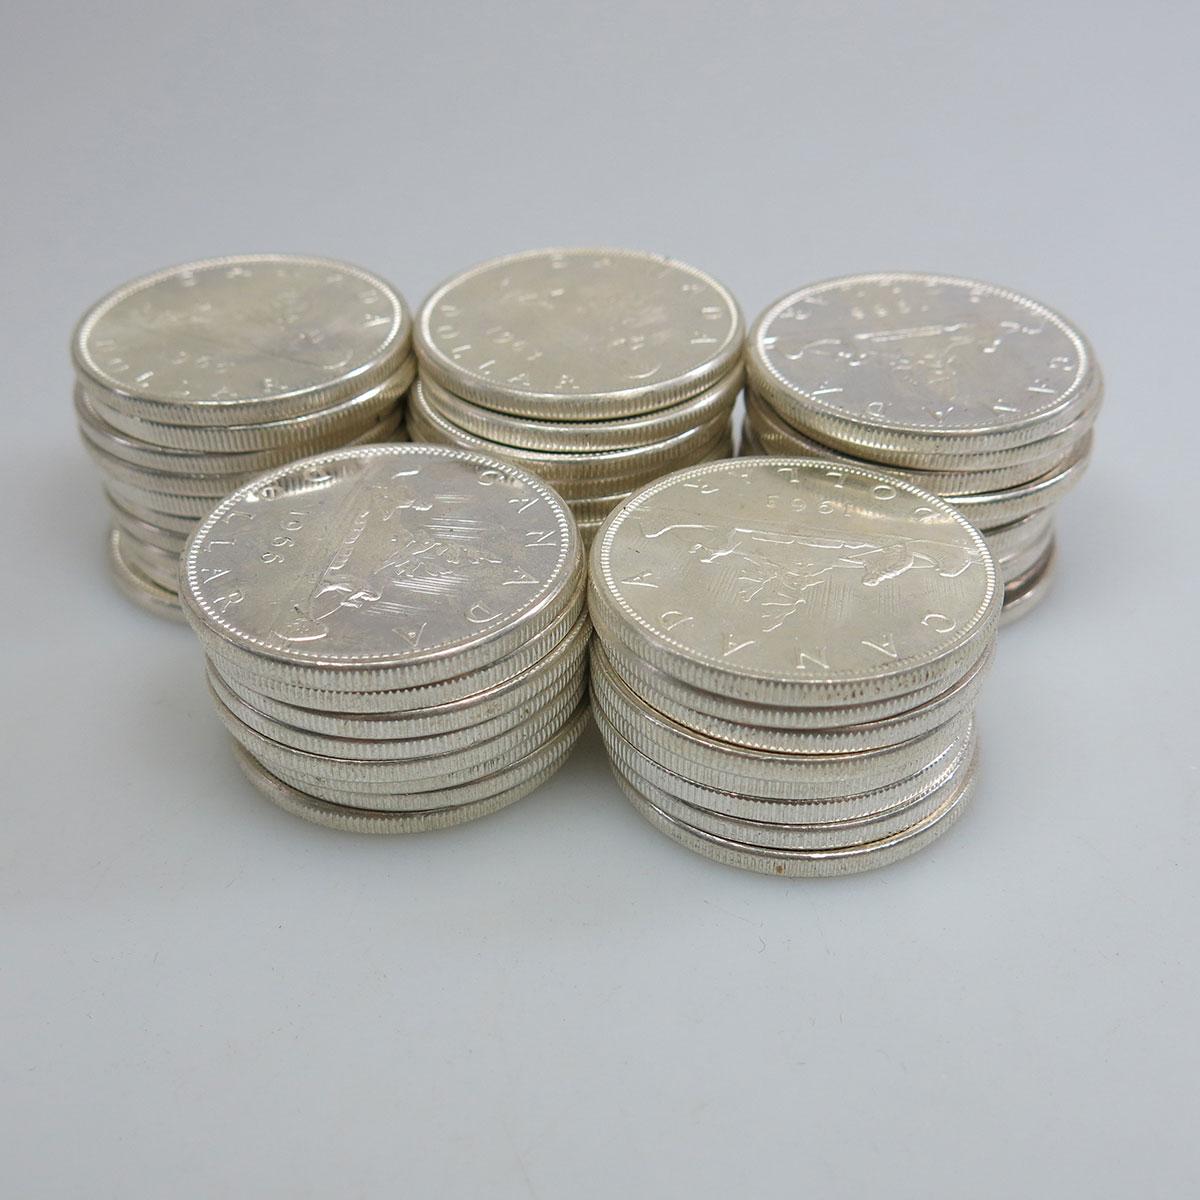 46 Canadian Silver Dollars